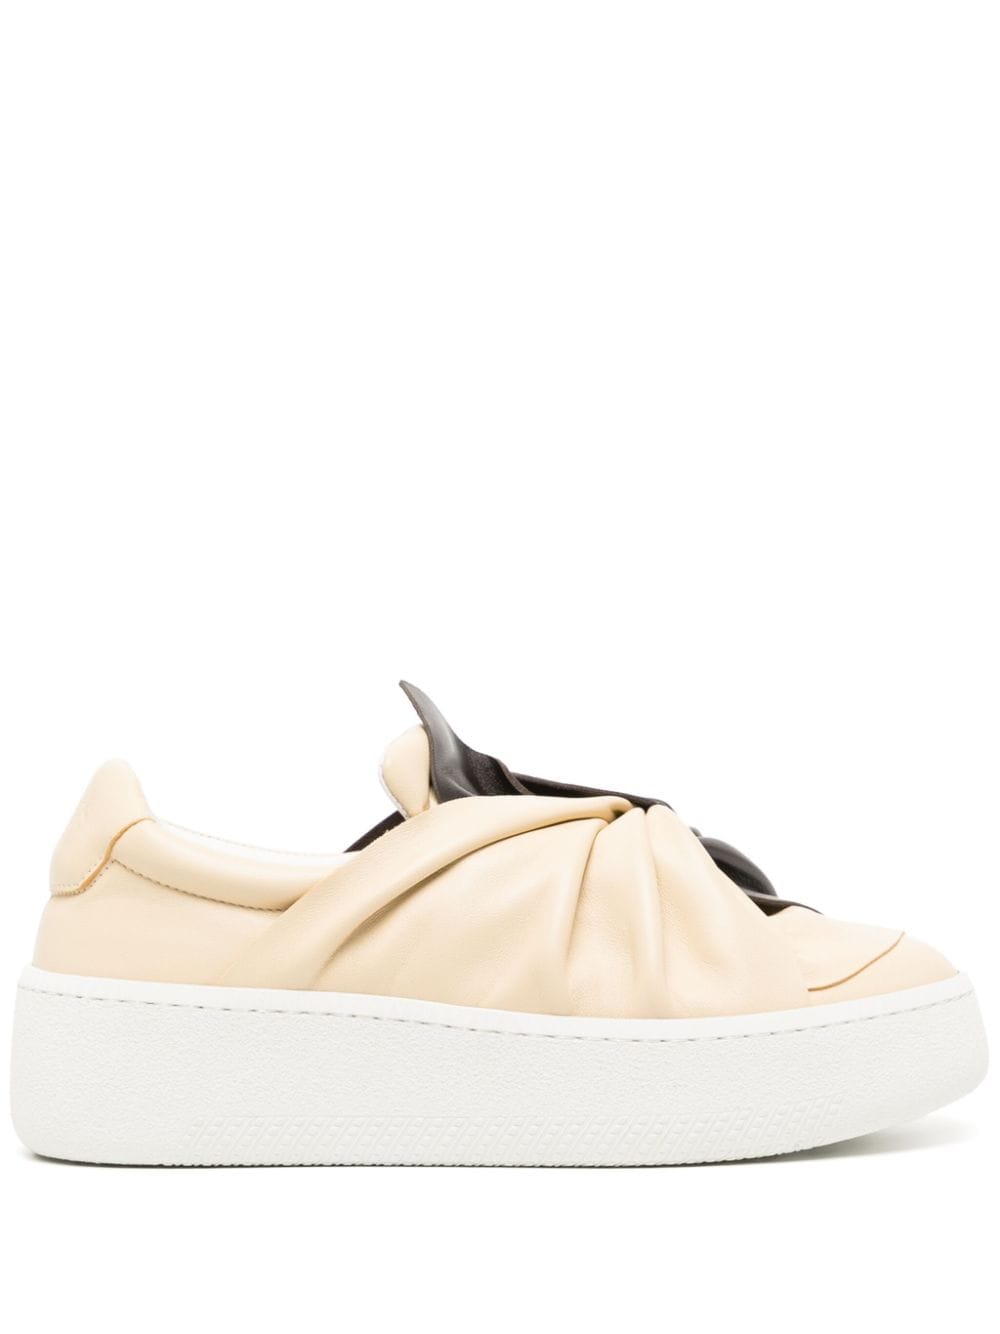 Ports 1961 two-tone knot-detail loafers - Neutrals von Ports 1961